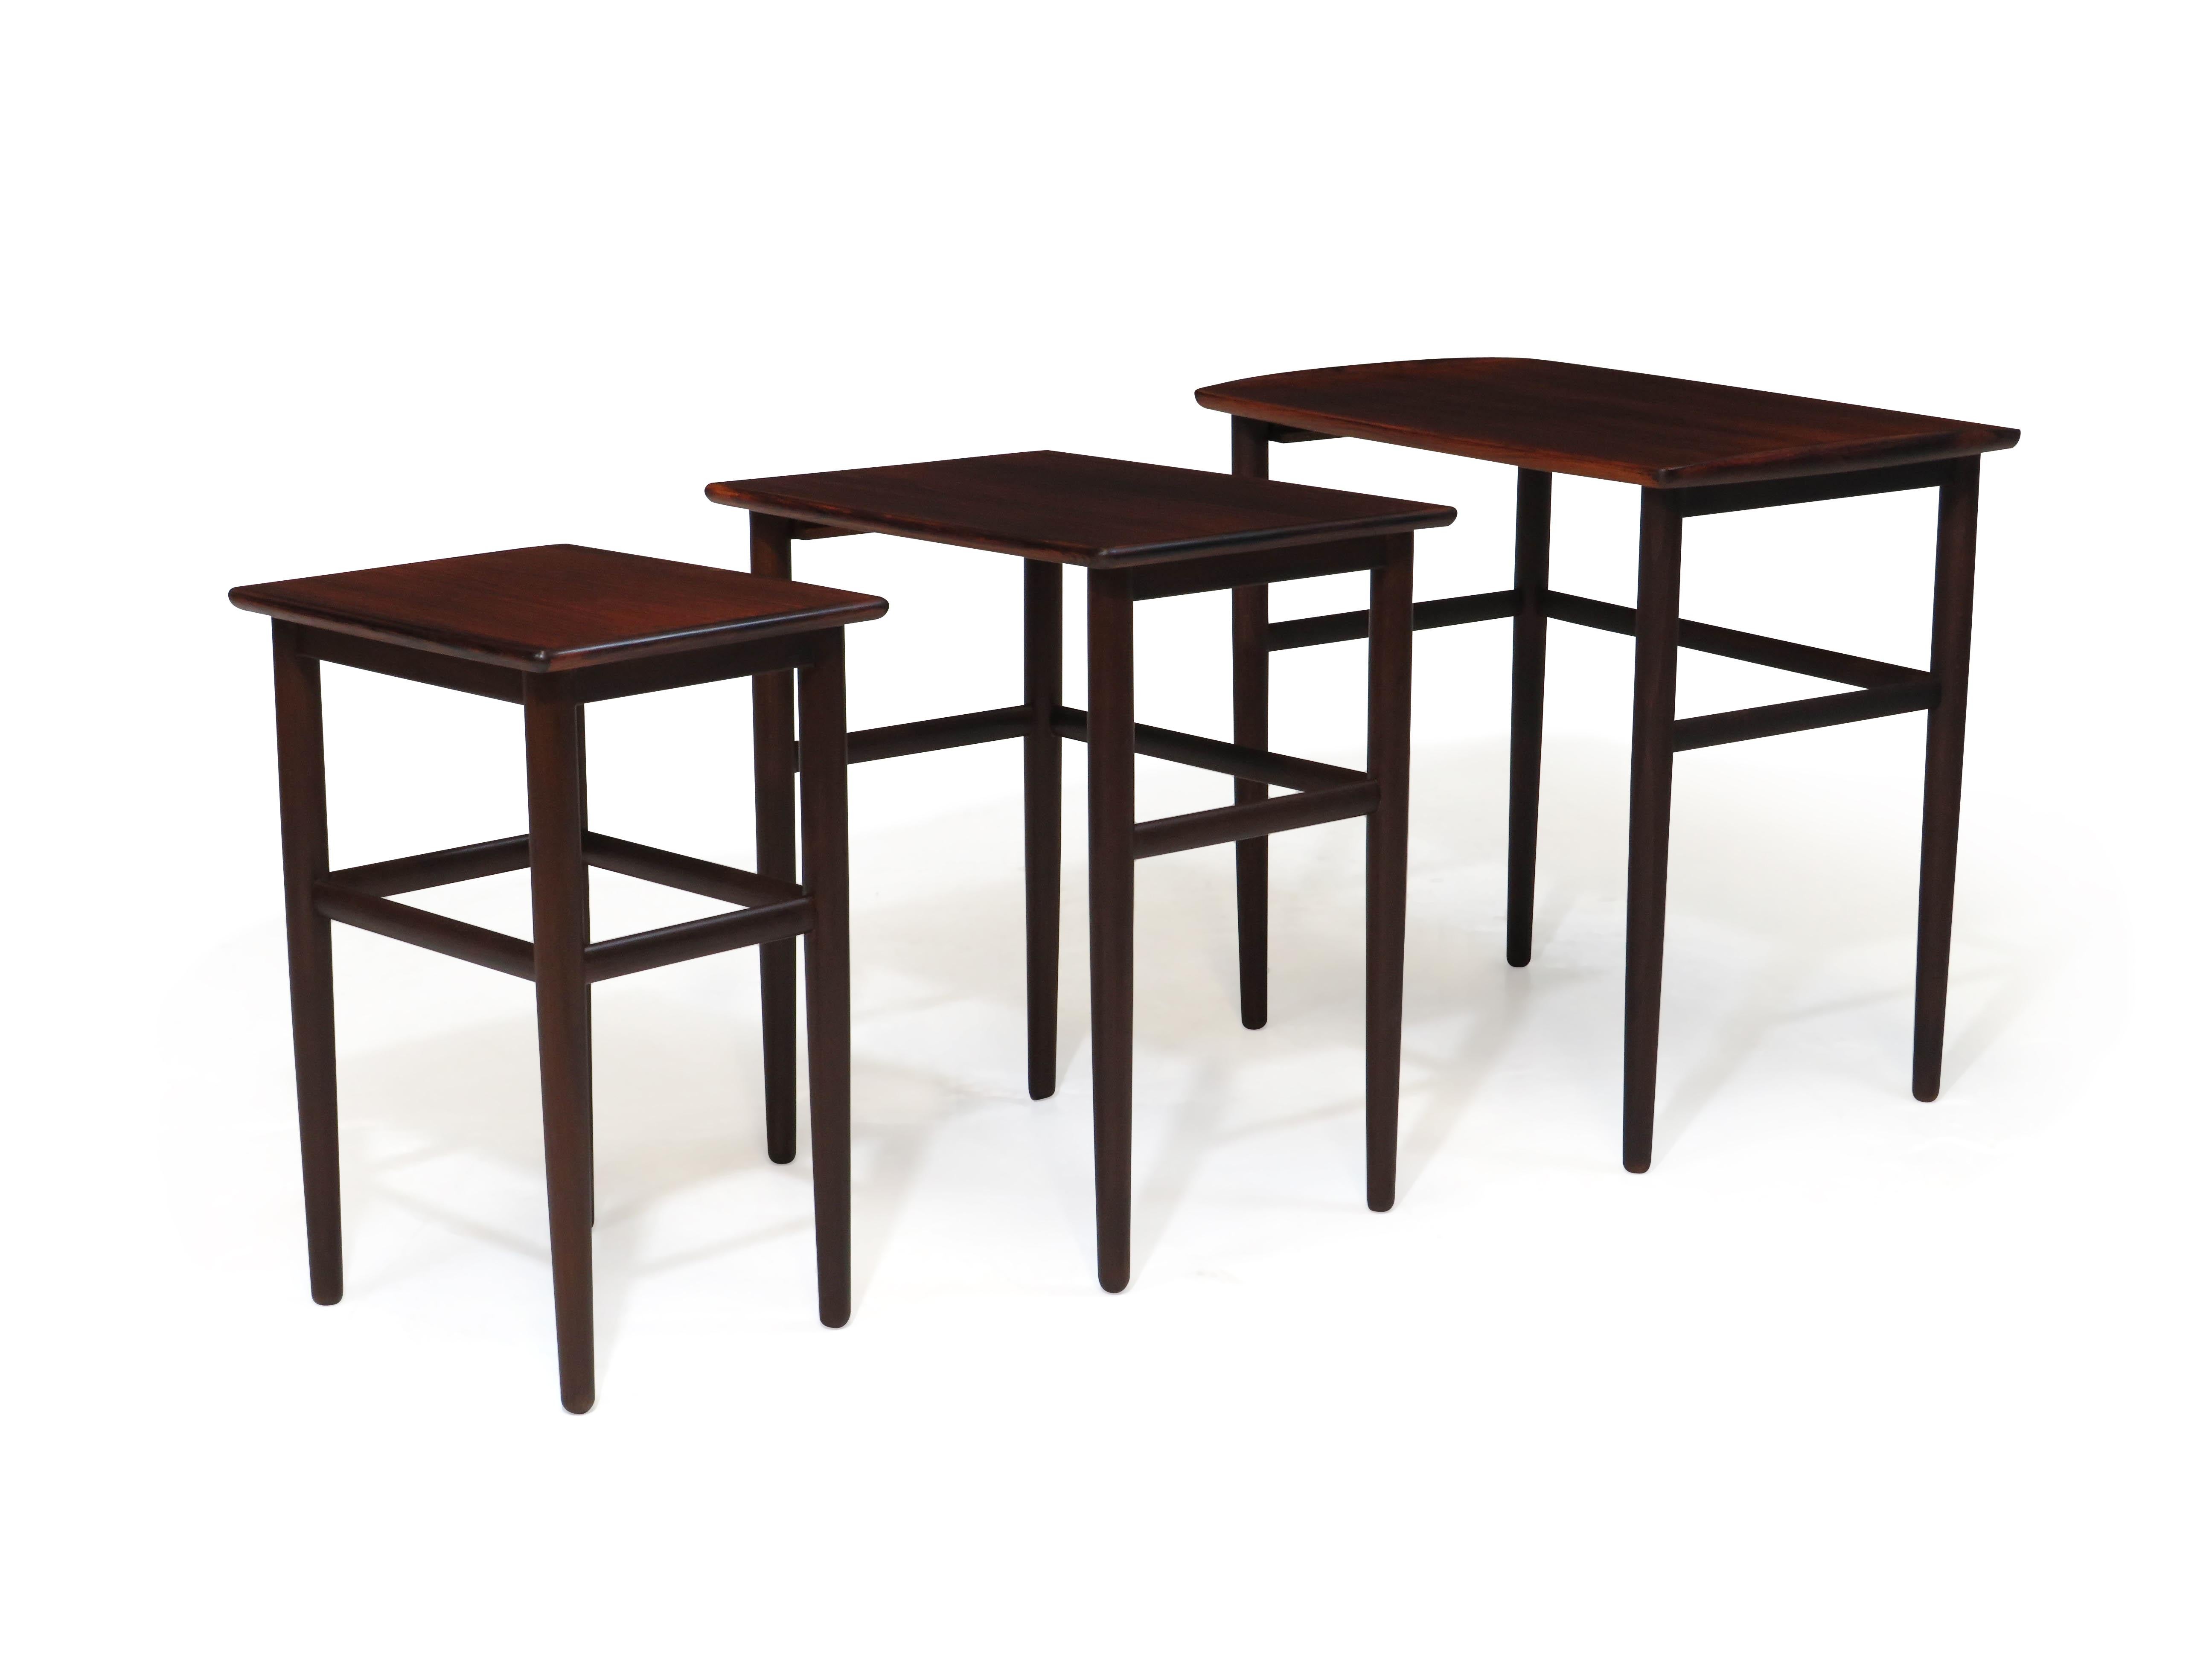 Set of three rosewood nesting tables with tapered legs and minimal design. Flexible in any configuration to suit your needs. Finely restored and in excellent condition with minor signs of age and use.
Middle Nesting Table Measurements W 17.25'' x D